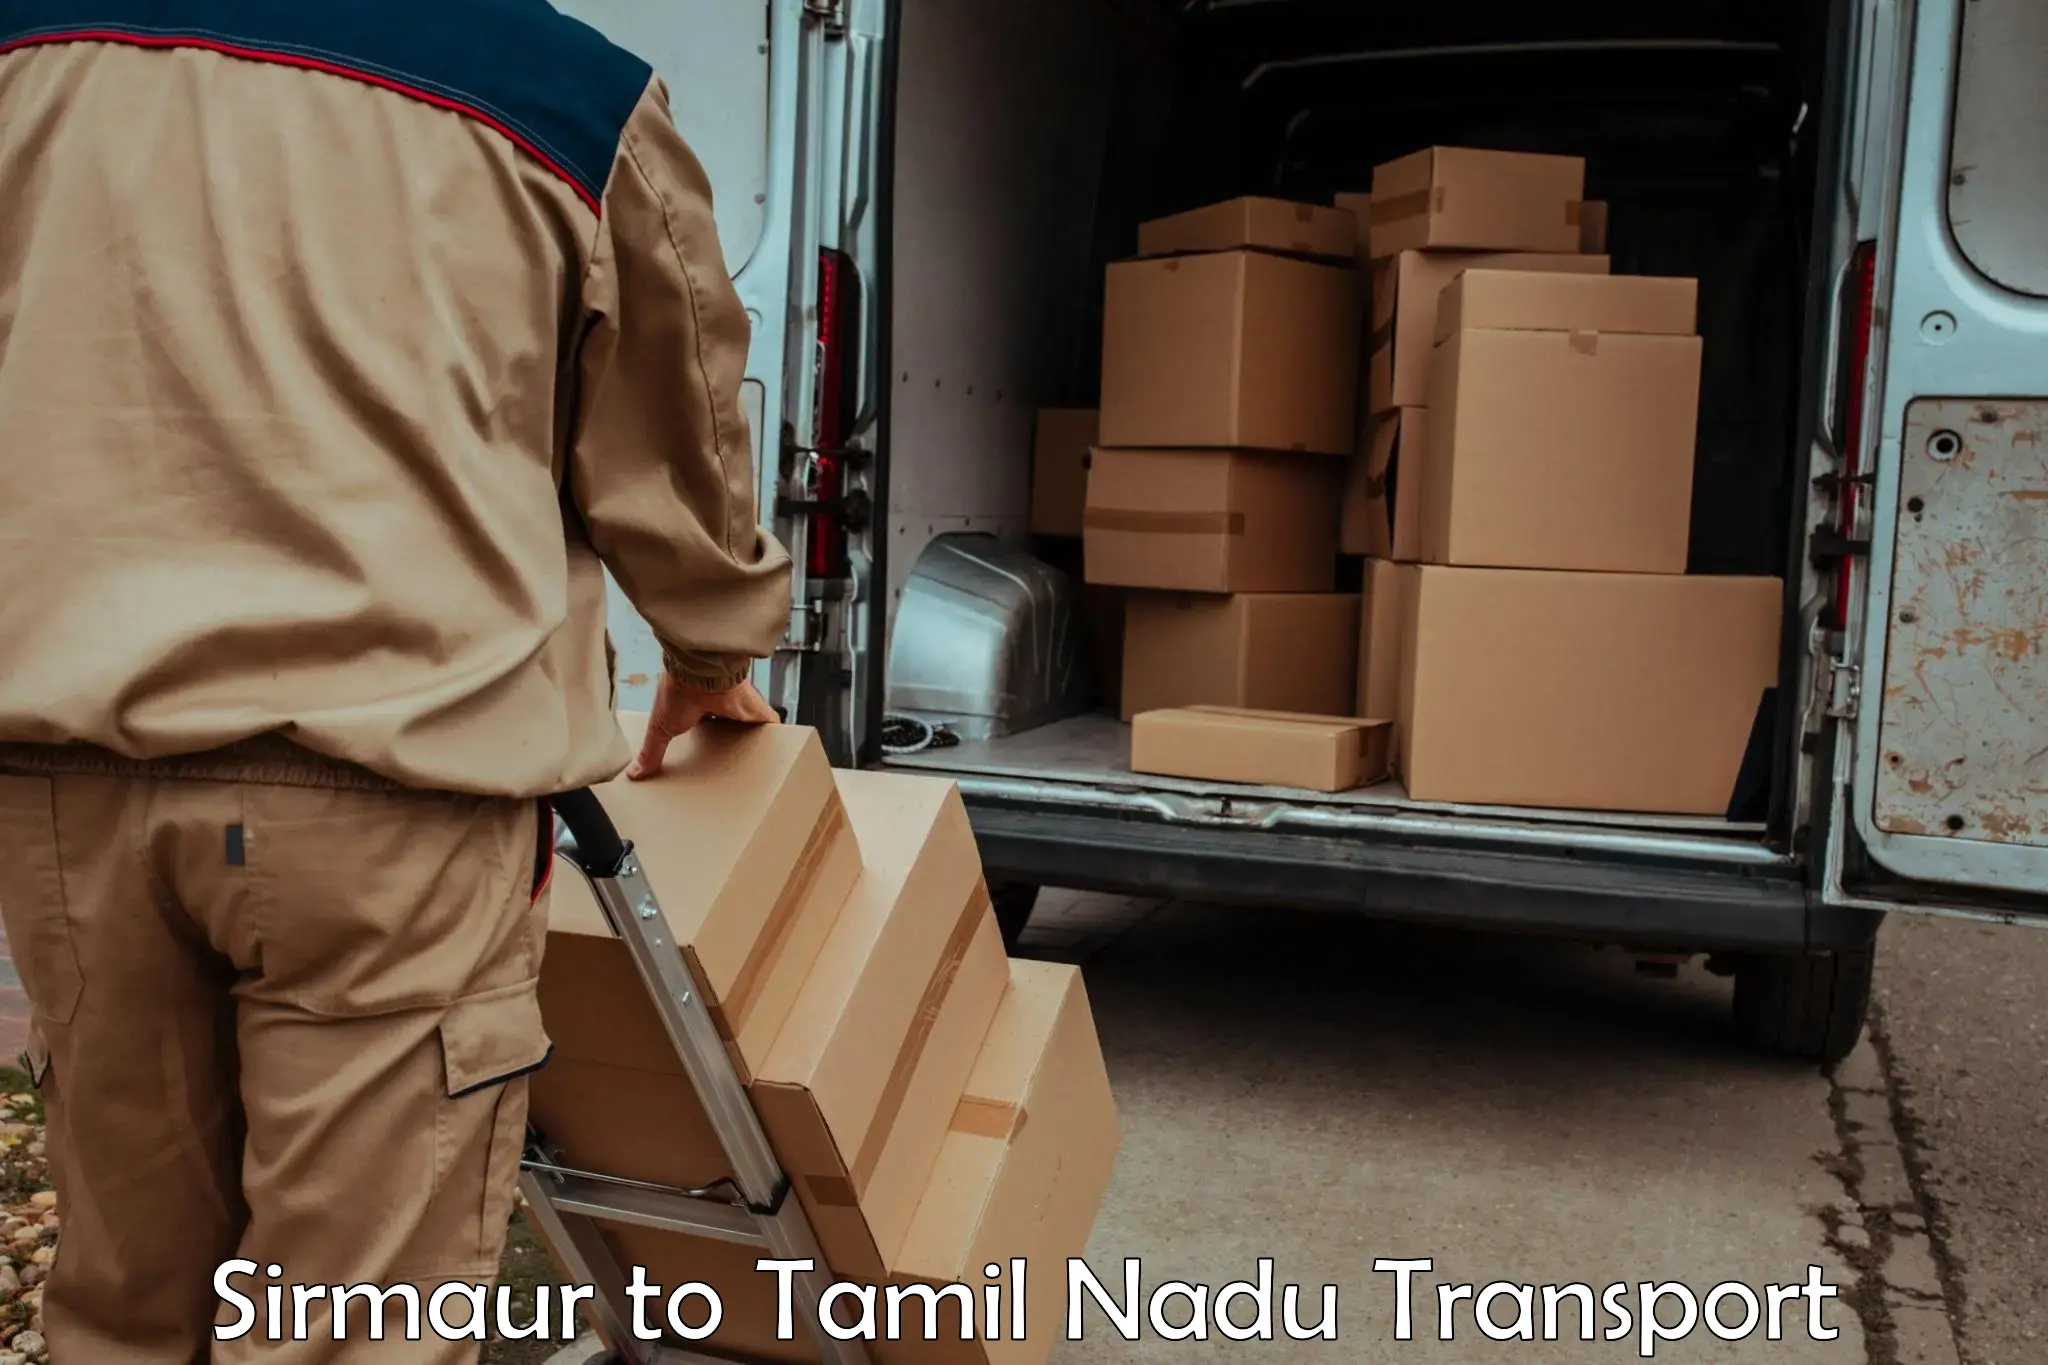 Transport shared services Sirmaur to Vellore Institute of Technology